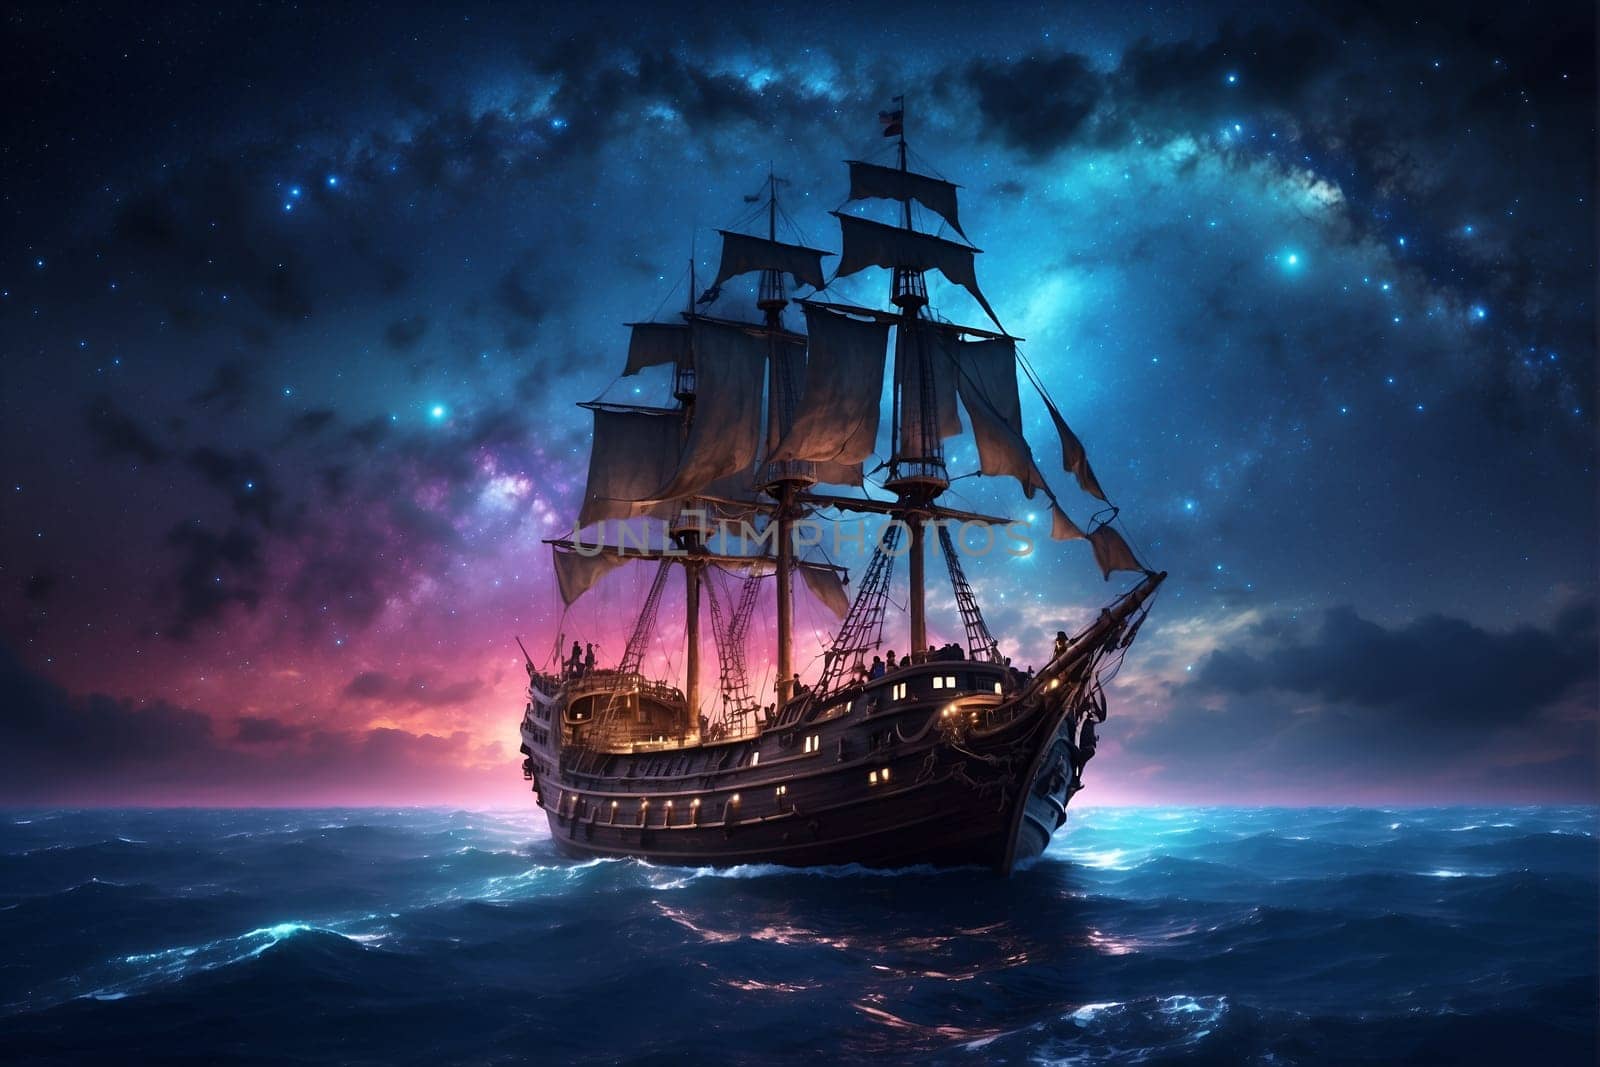 A pirate ship with billowing sails floats on the dark ocean waters during the night.